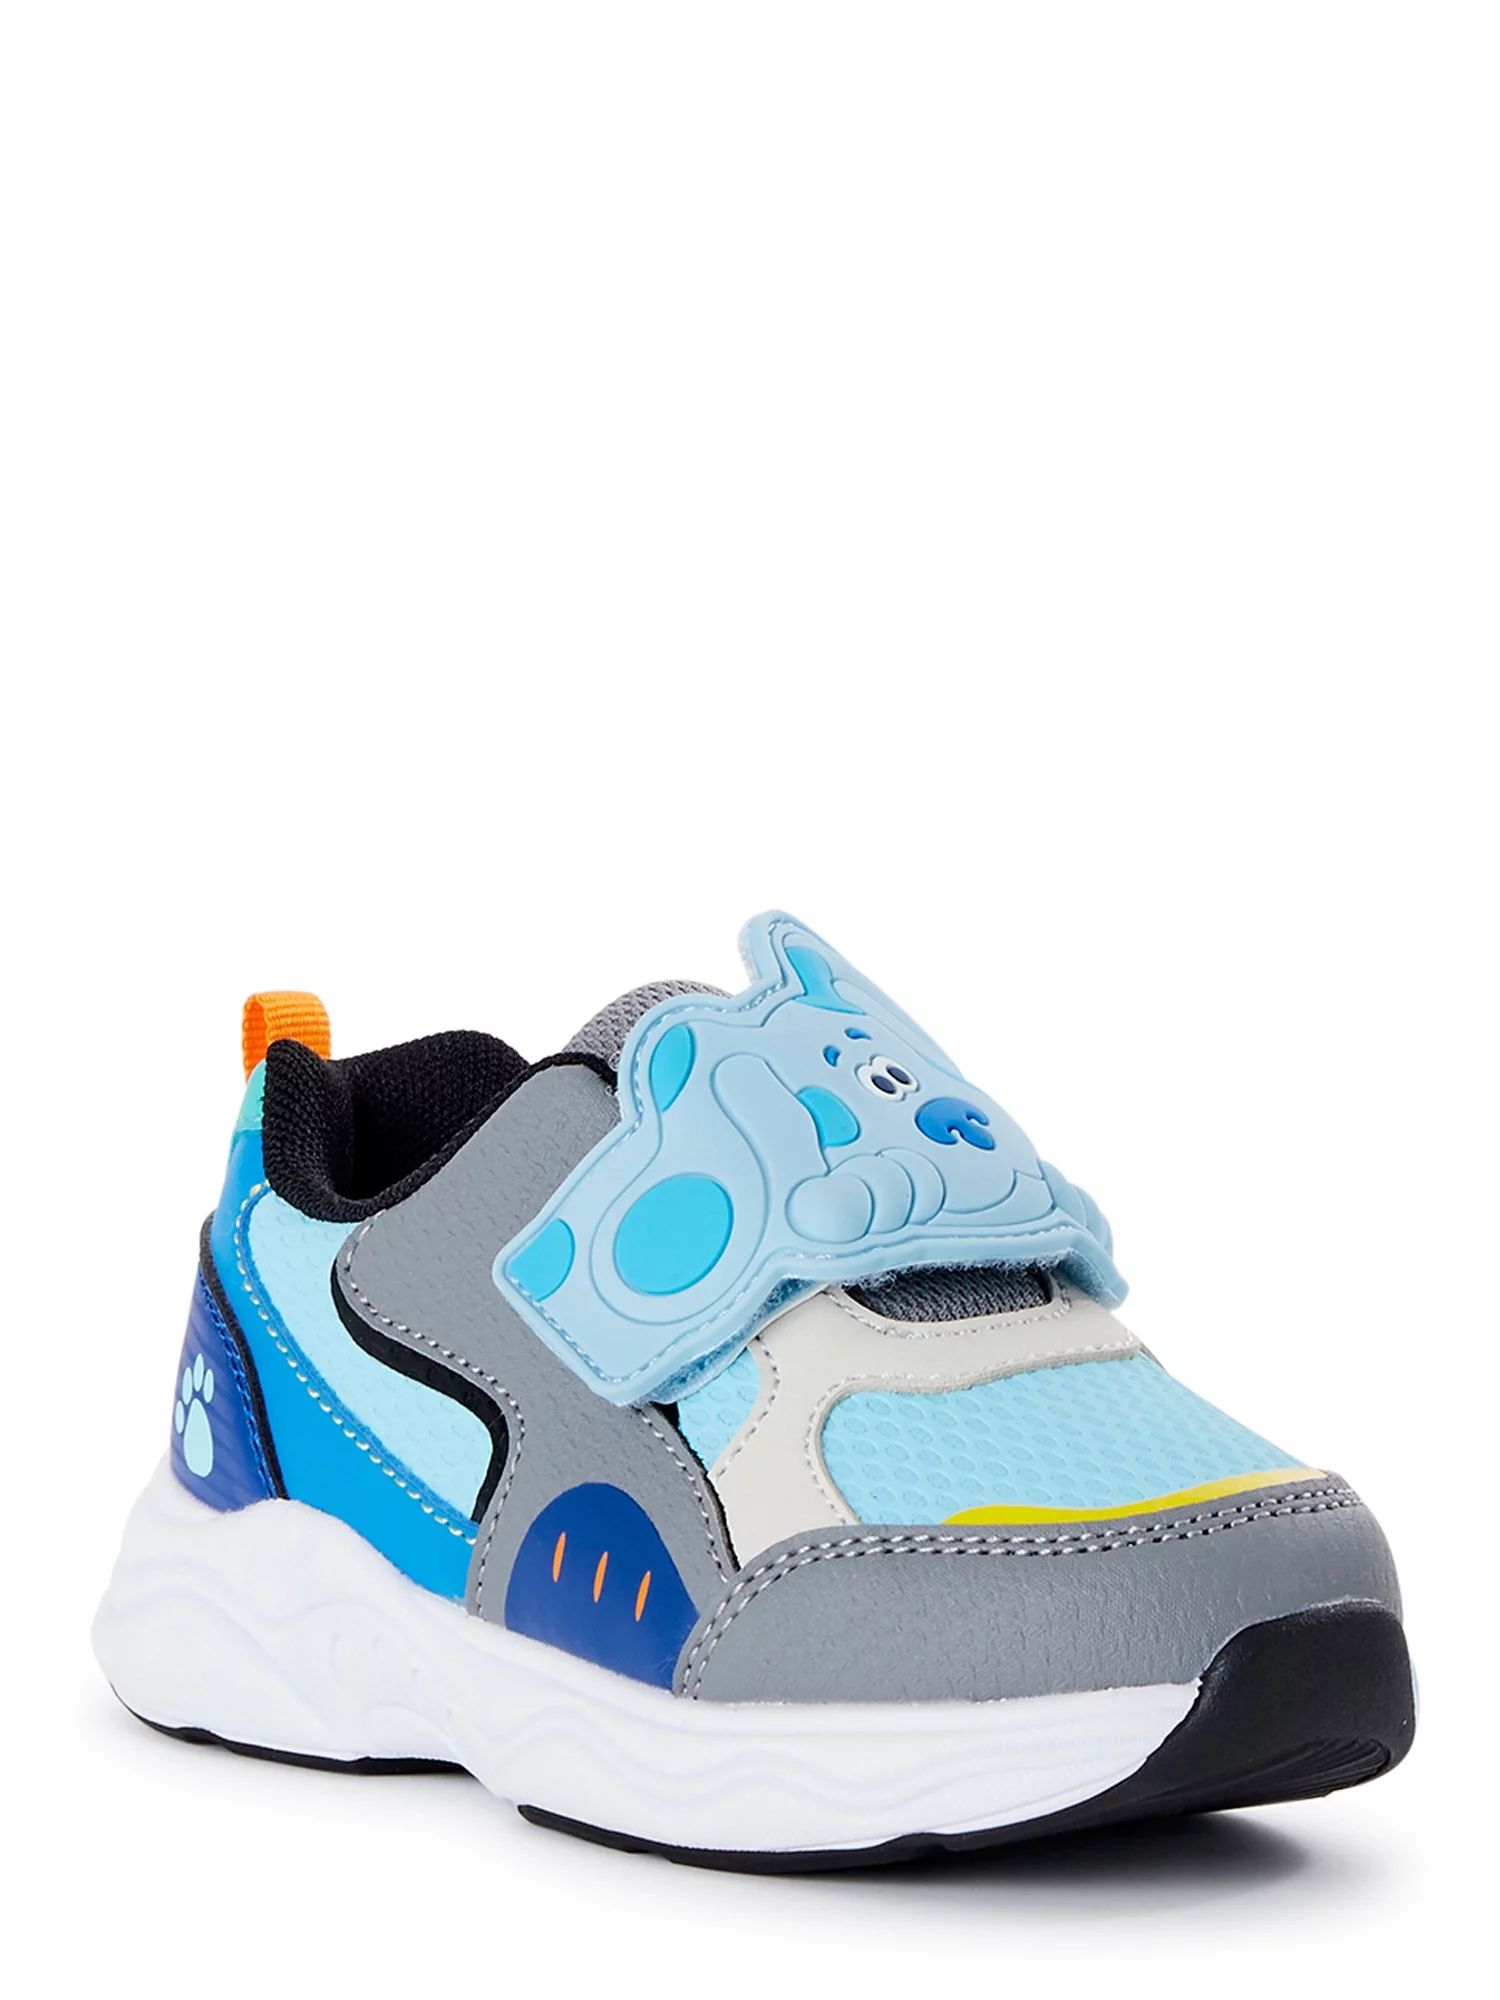 Blue's Clues Toddler Boys Athletic Sneakers, Sizes 5-11 | Walmart (US)